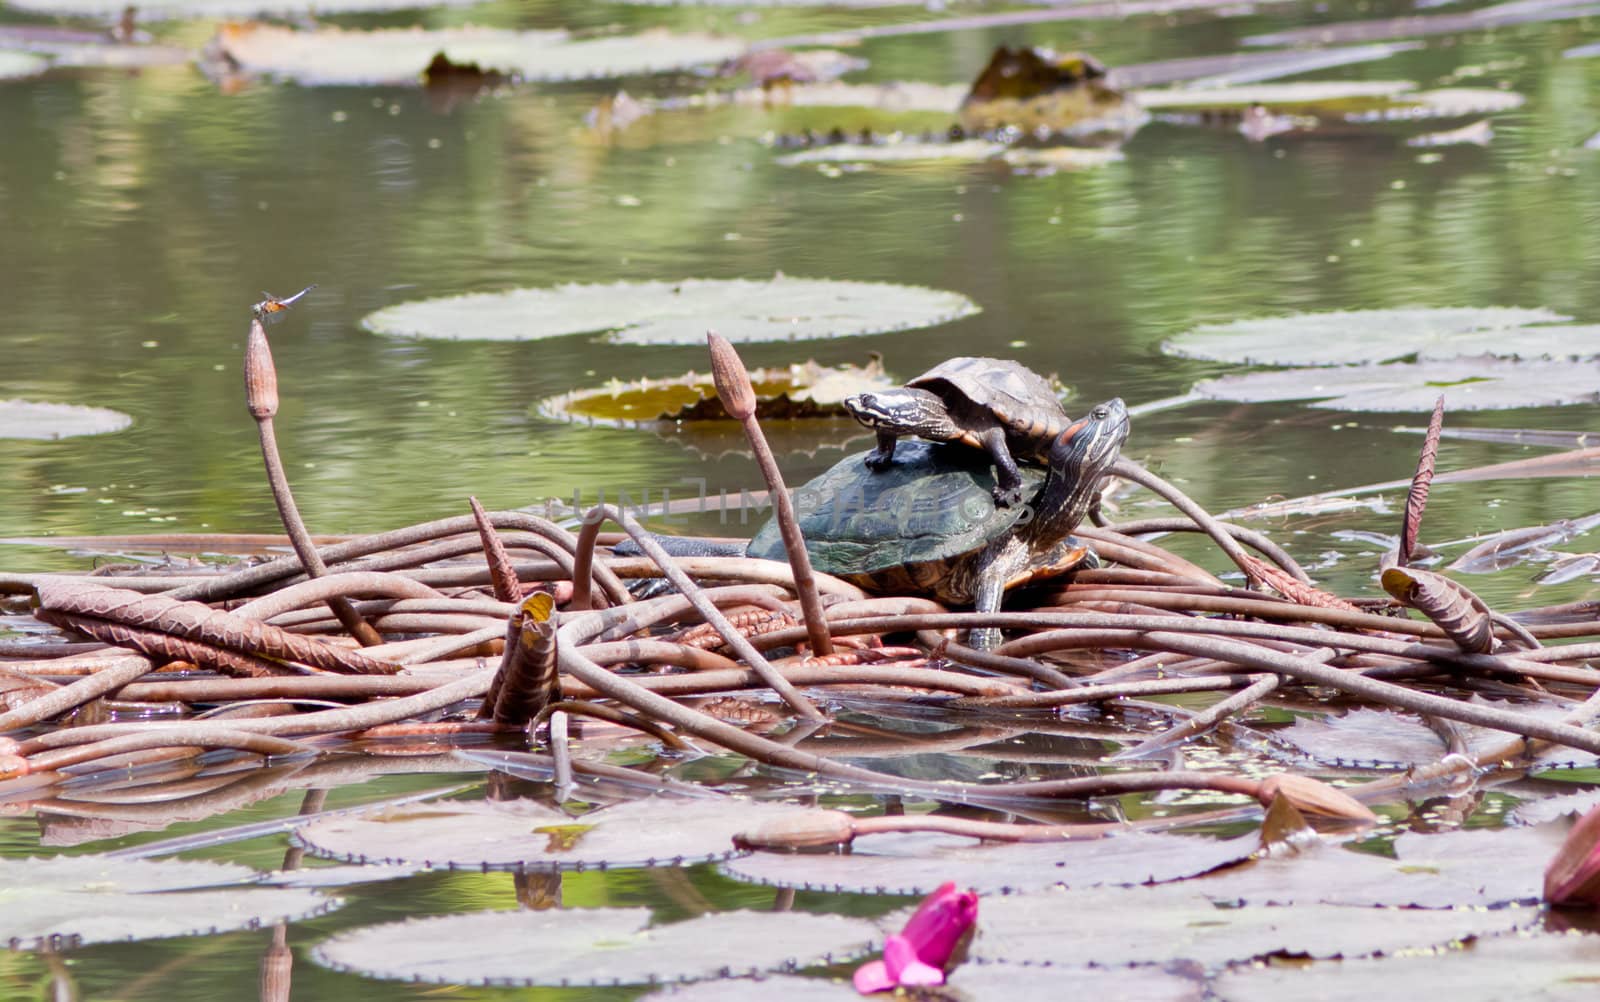 Turtles family in the wild -sun  by nikky1972